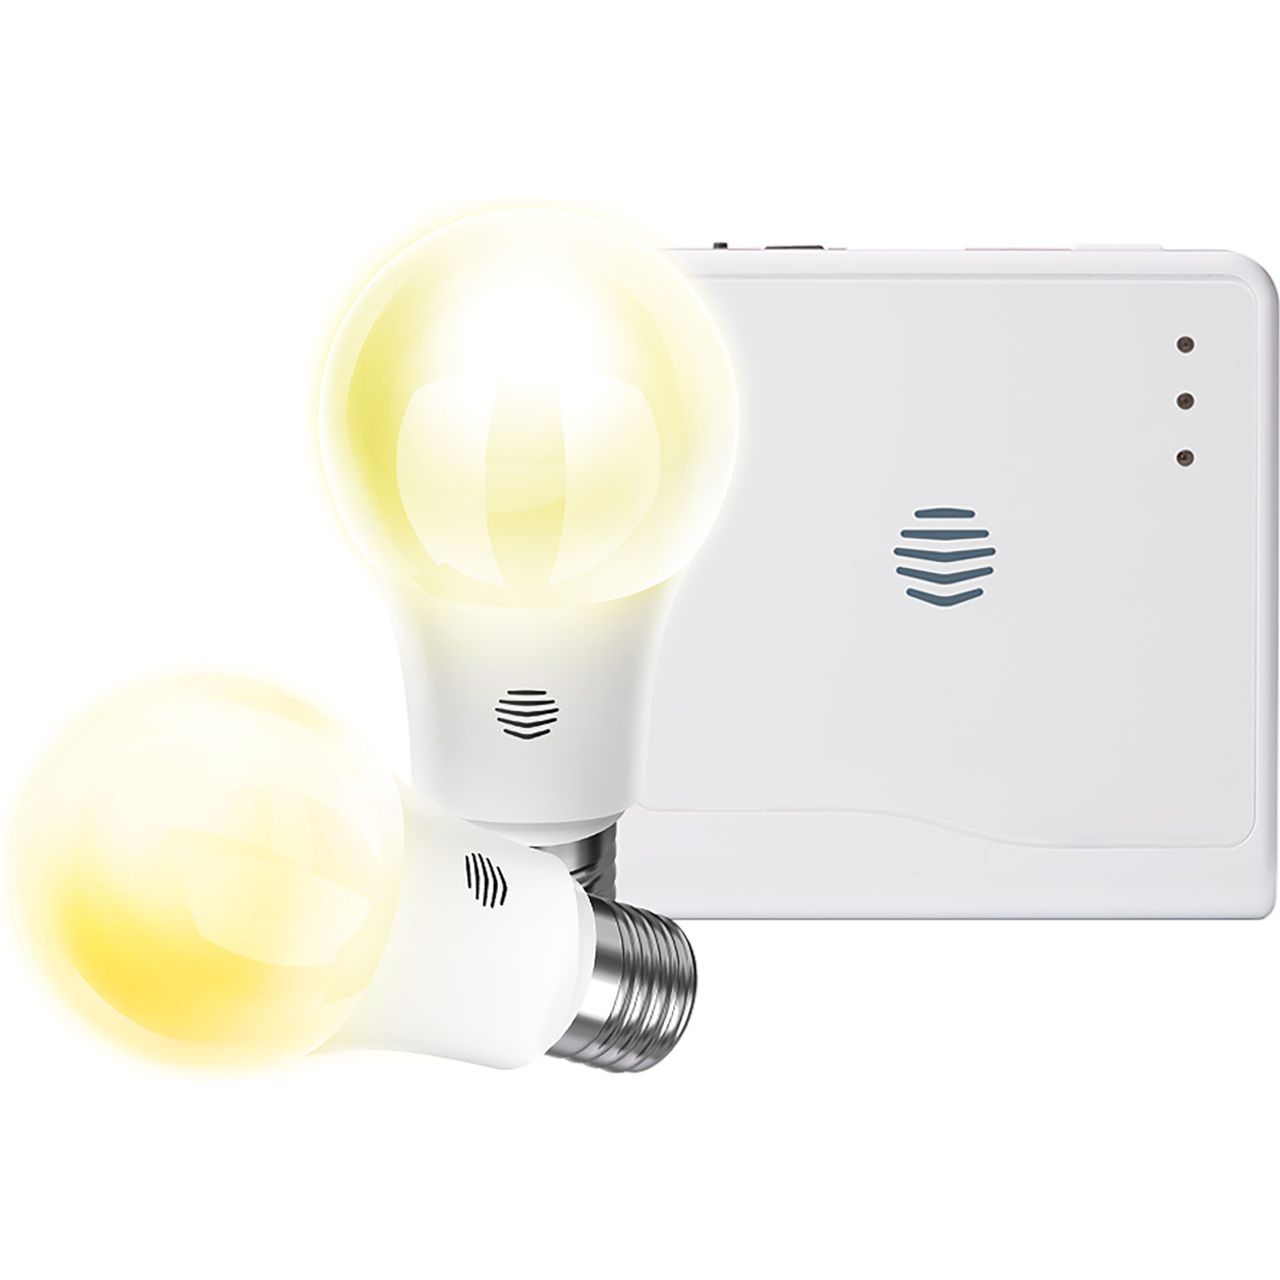 Hive Smart Light Warm White Twin Pack E27 And Hub Review